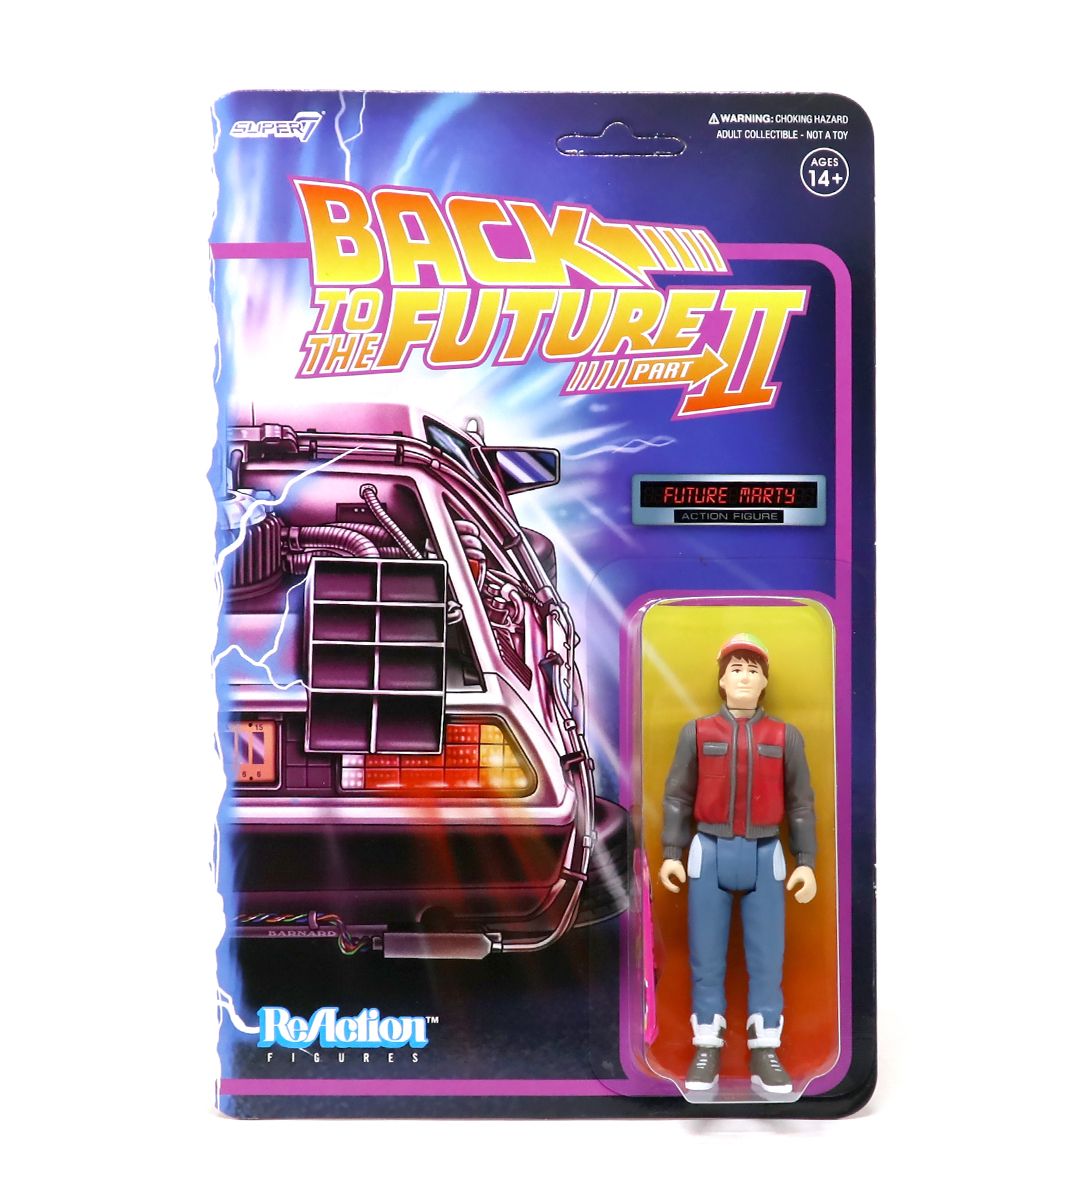 Future Marty - BTTF2 - ReAction figure